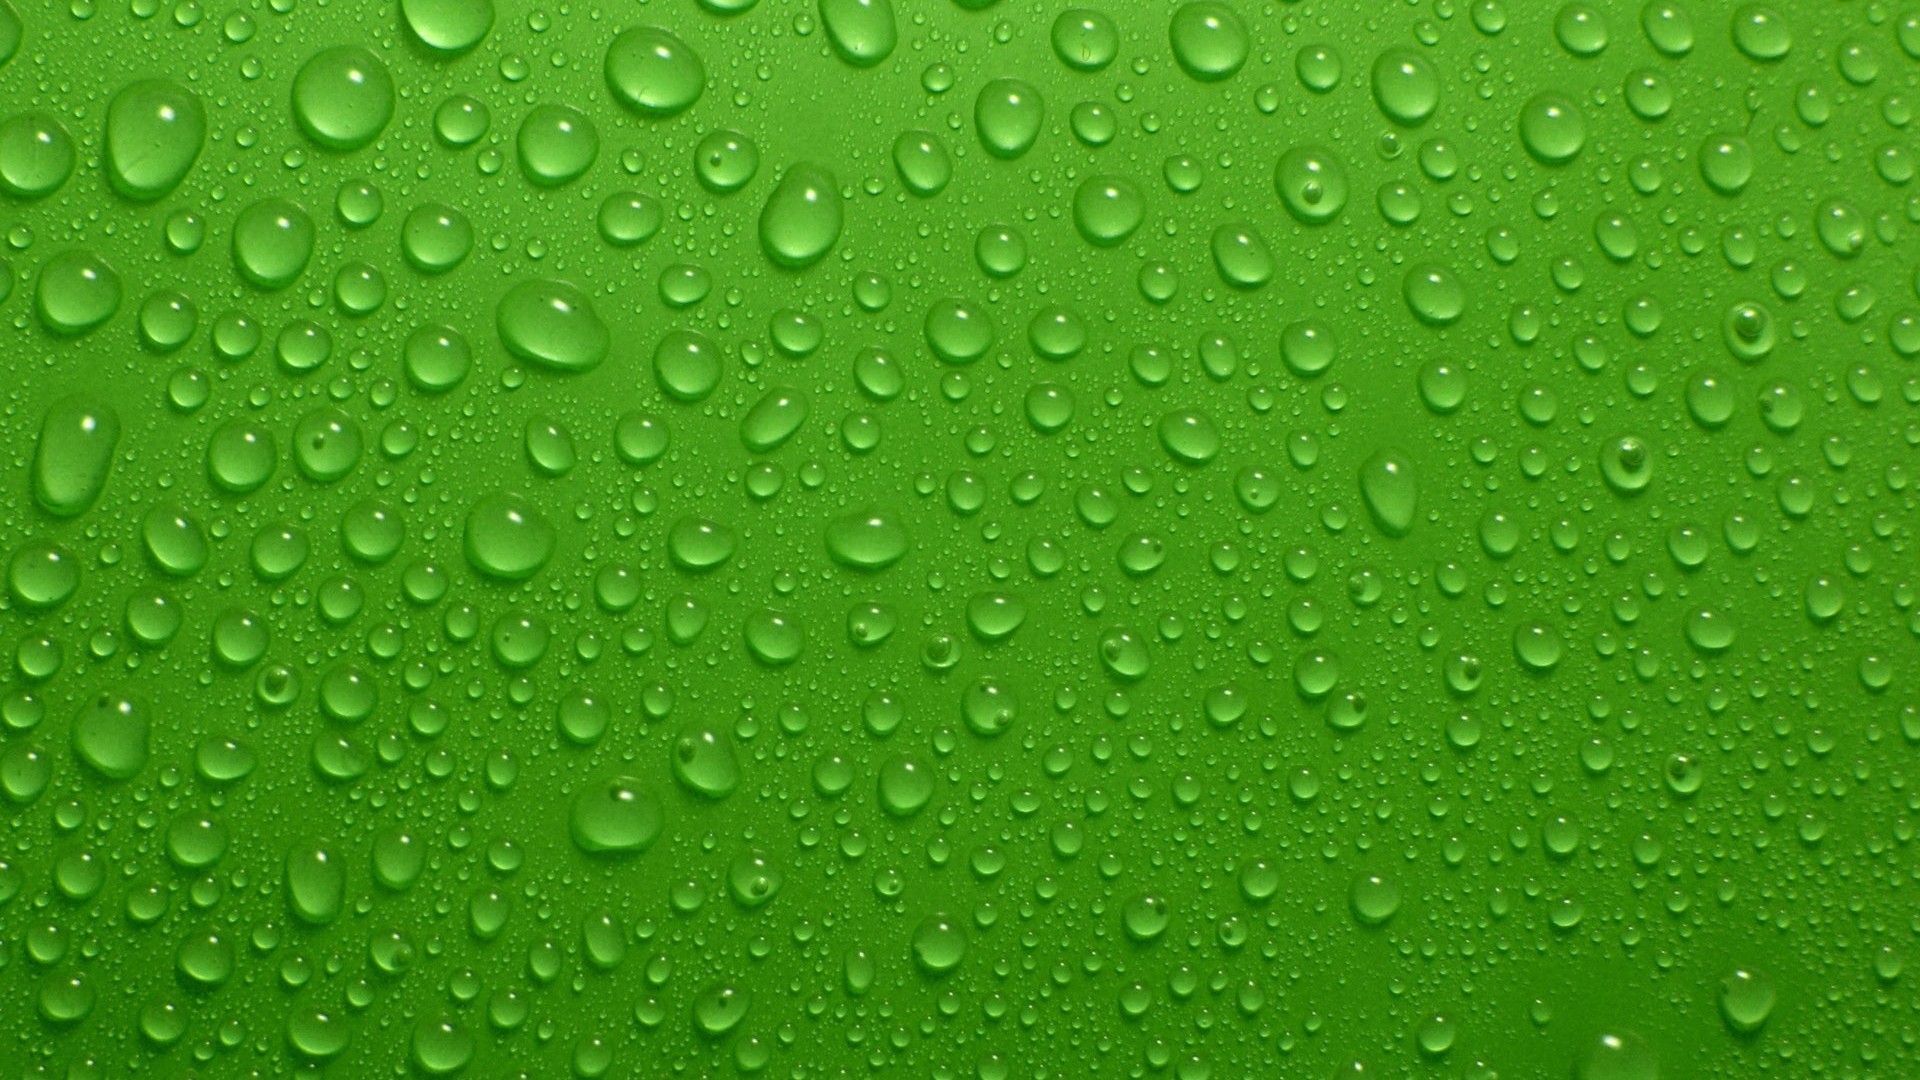 Green Colour Background Wallpaper HD With Resolution 1920X1080 pixel. You can make this wallpaper for your Desktop Computer Backgrounds, Mac Wallpapers, Android Lock screen or iPhone Screensavers